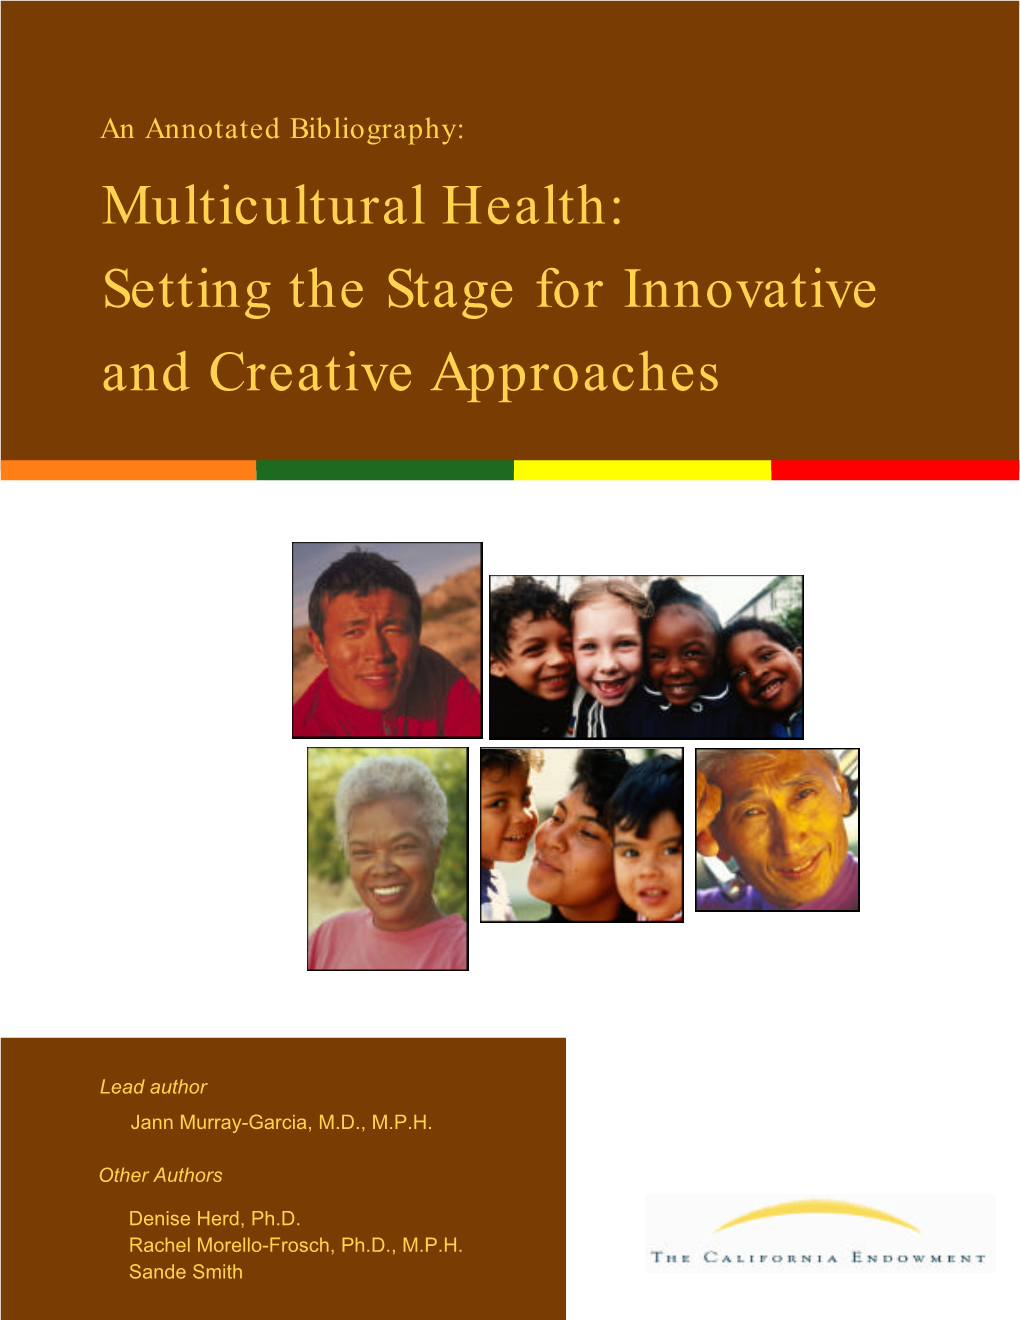 An Annotated Bibliography: Multicultural Health: Setting the Stage for Innovative and Creative Approaches